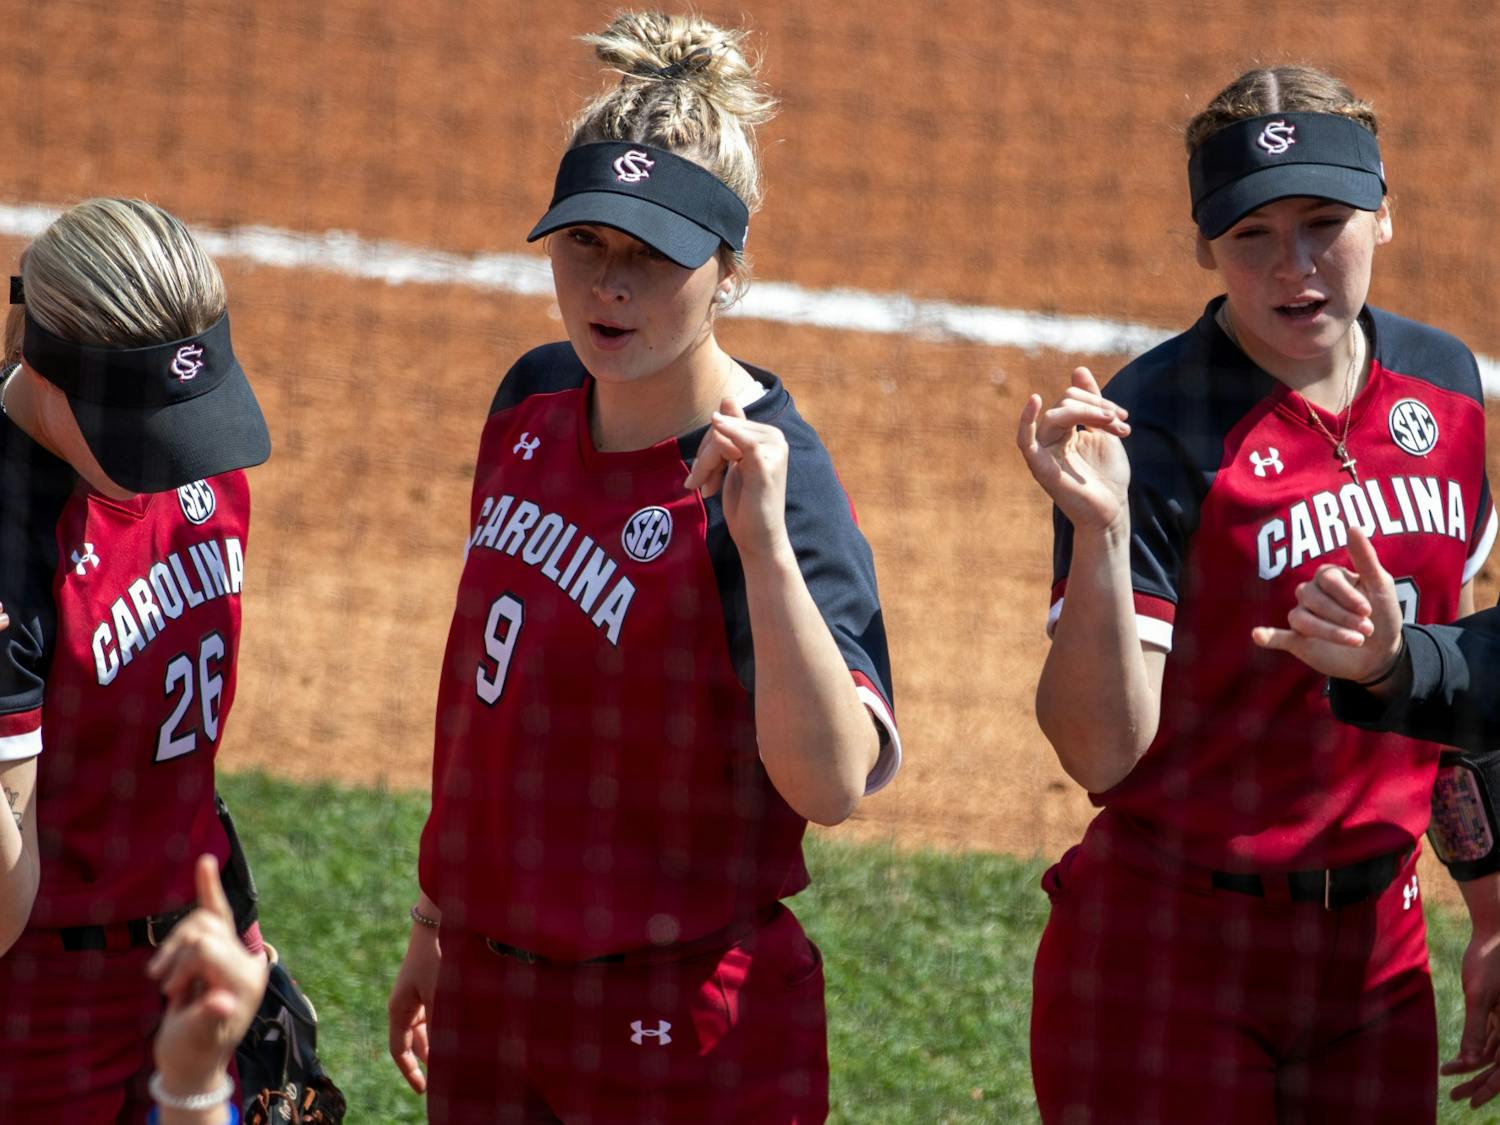 South Carolina softball players present spurs up hand gesture in preparation of their game against Virginia Tech on Saturday Feb. 26, 2022. The Carolina Gamecocks lost to the Virginia Tech Hokies 5-3.